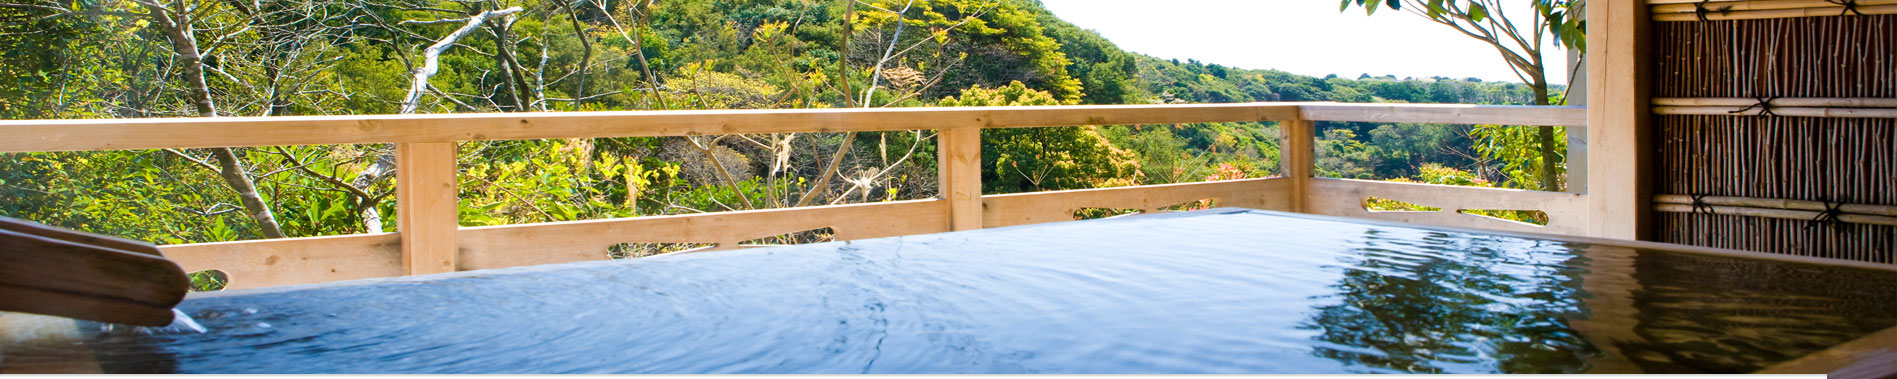 5 Top-Rated Onsen hotels in Johor